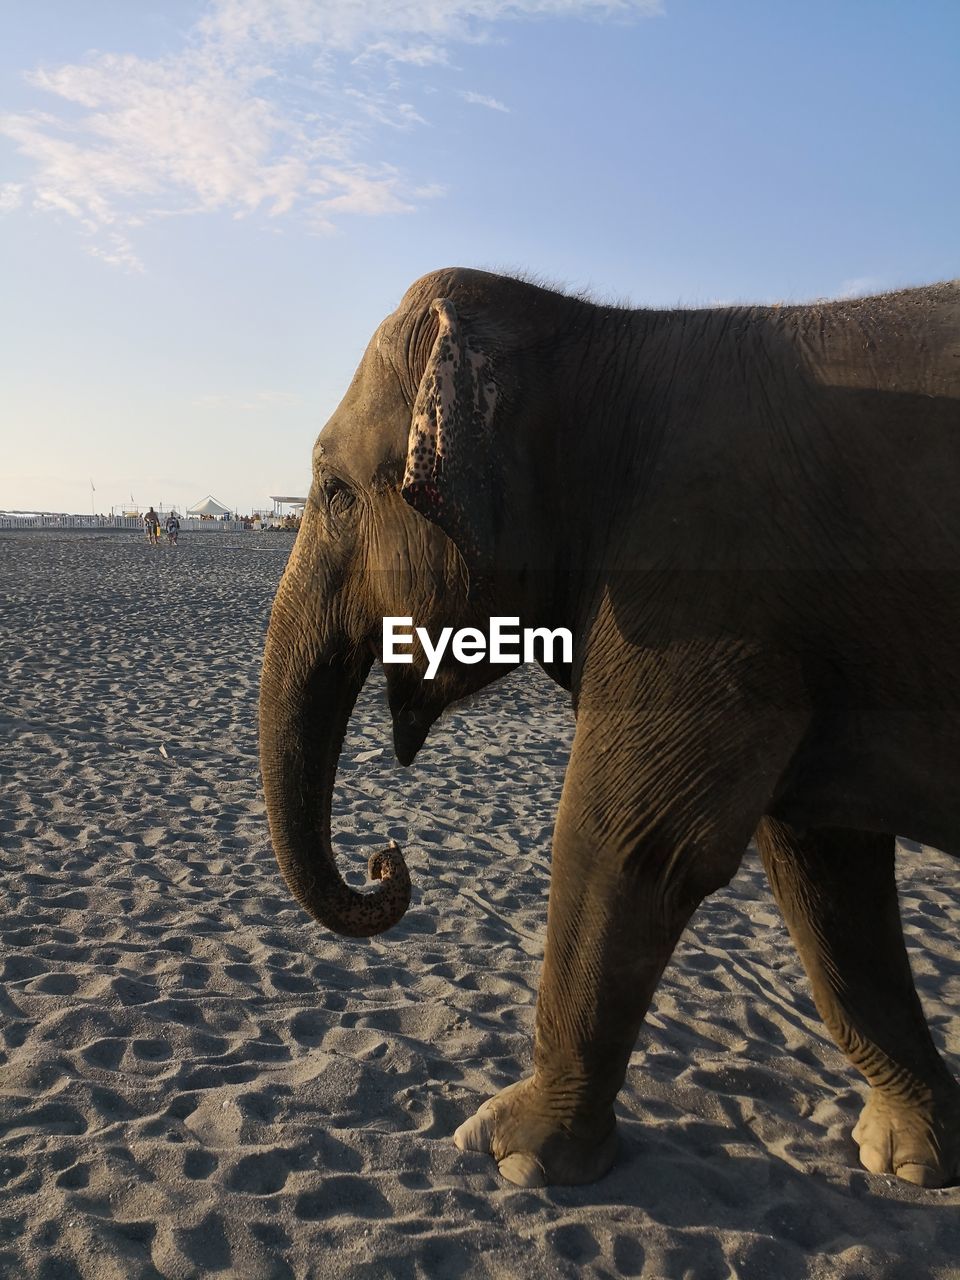 SIDE VIEW OF ELEPHANT ON SAND AT BEACH